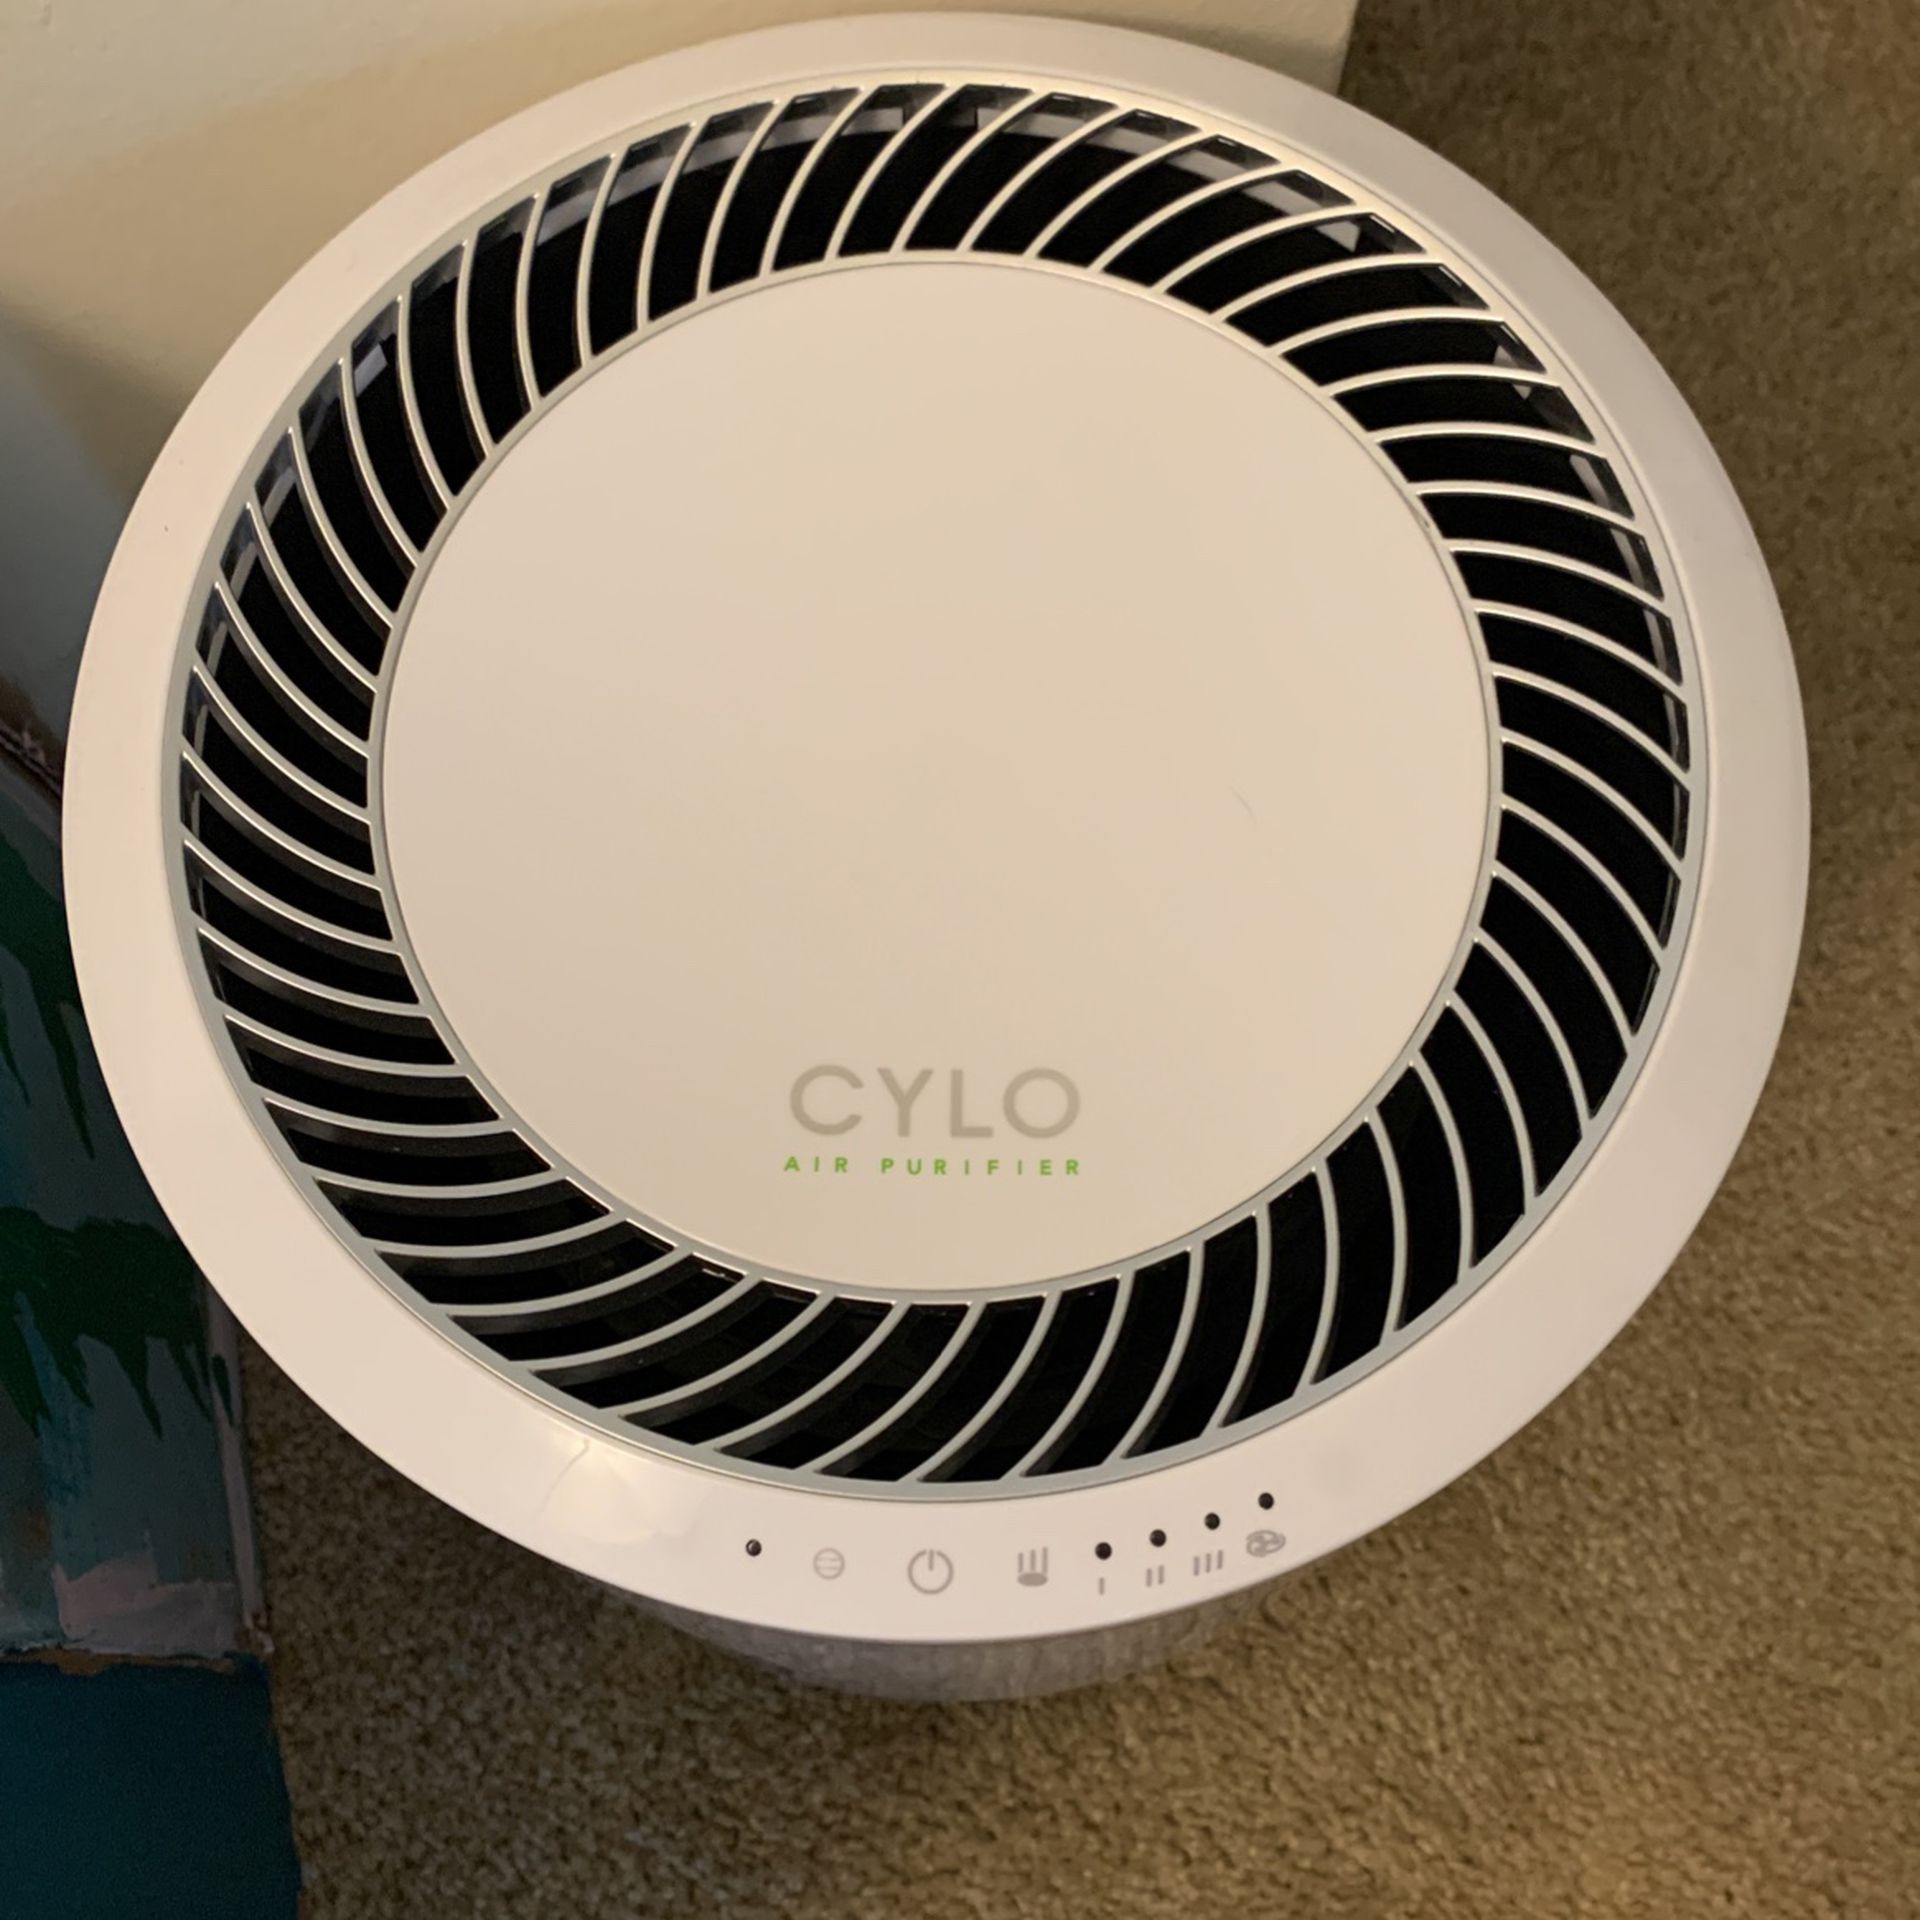 Cylo air purifier